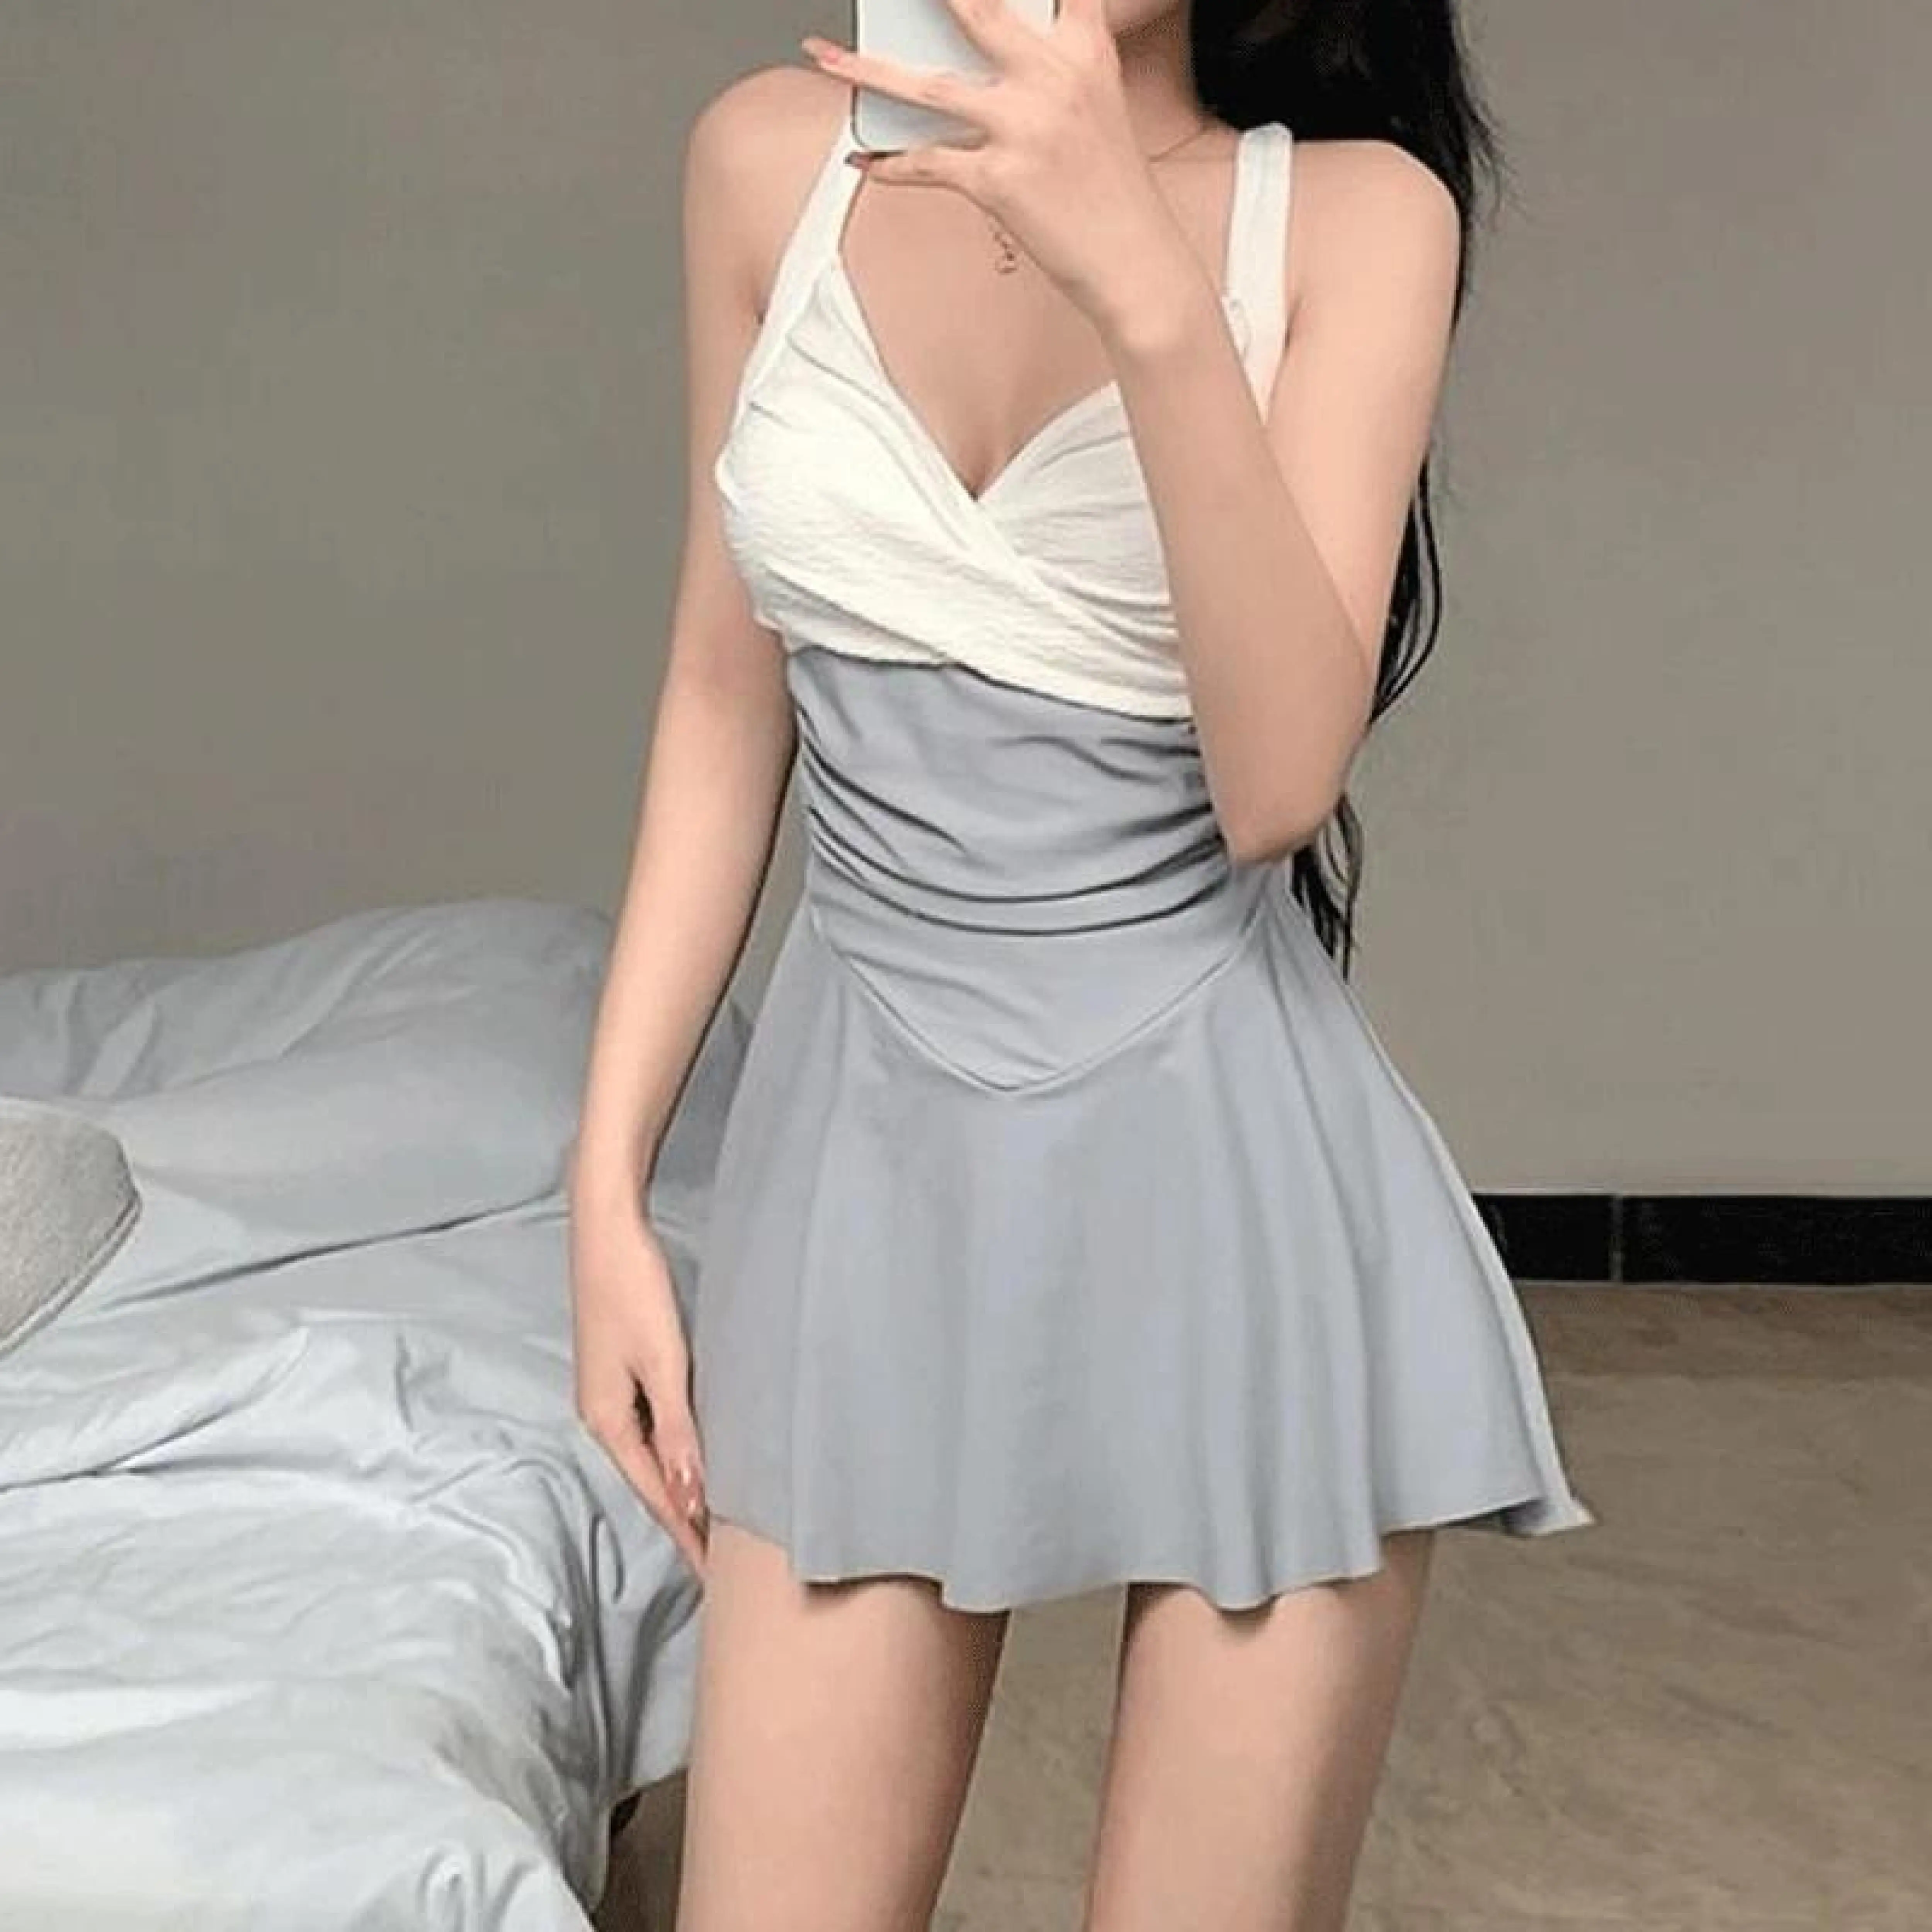 

Simplicity Thin Skirt Style Small Chest Slim Backless Spliced Bandage Conjoined Body Sexy Pure Desire Women's Clothing Swimwear